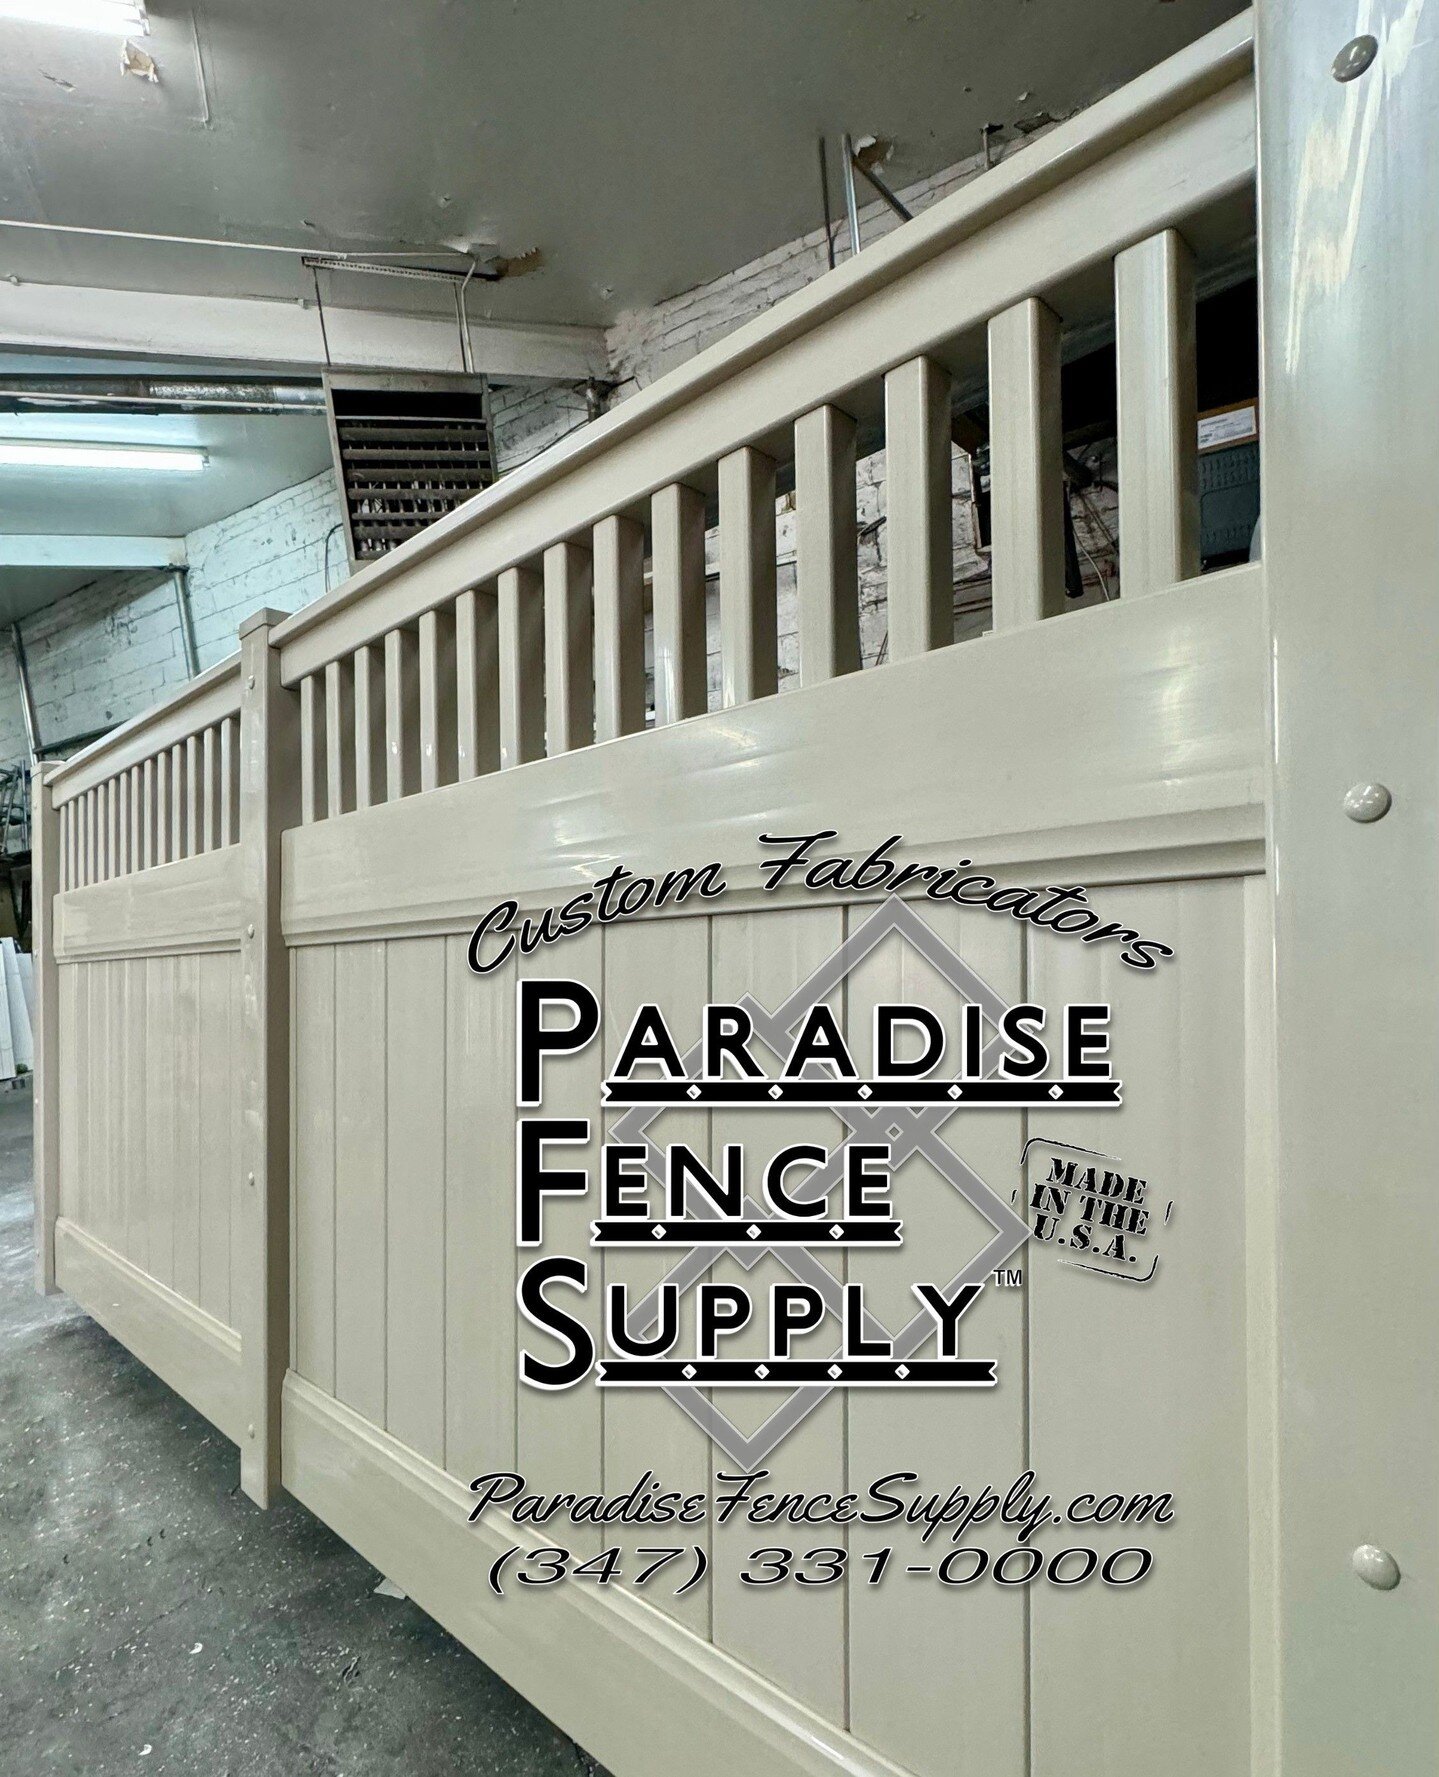 Custom PVC Sliding gates are available at Paradise Fence Supply. This rolling PVC gate features our 2&quot; x 7&quot; Deco rails with a T-Rail top rail. It is backed with a custom-made welded galvanized frame. Interested? Contact us today at (347) 33